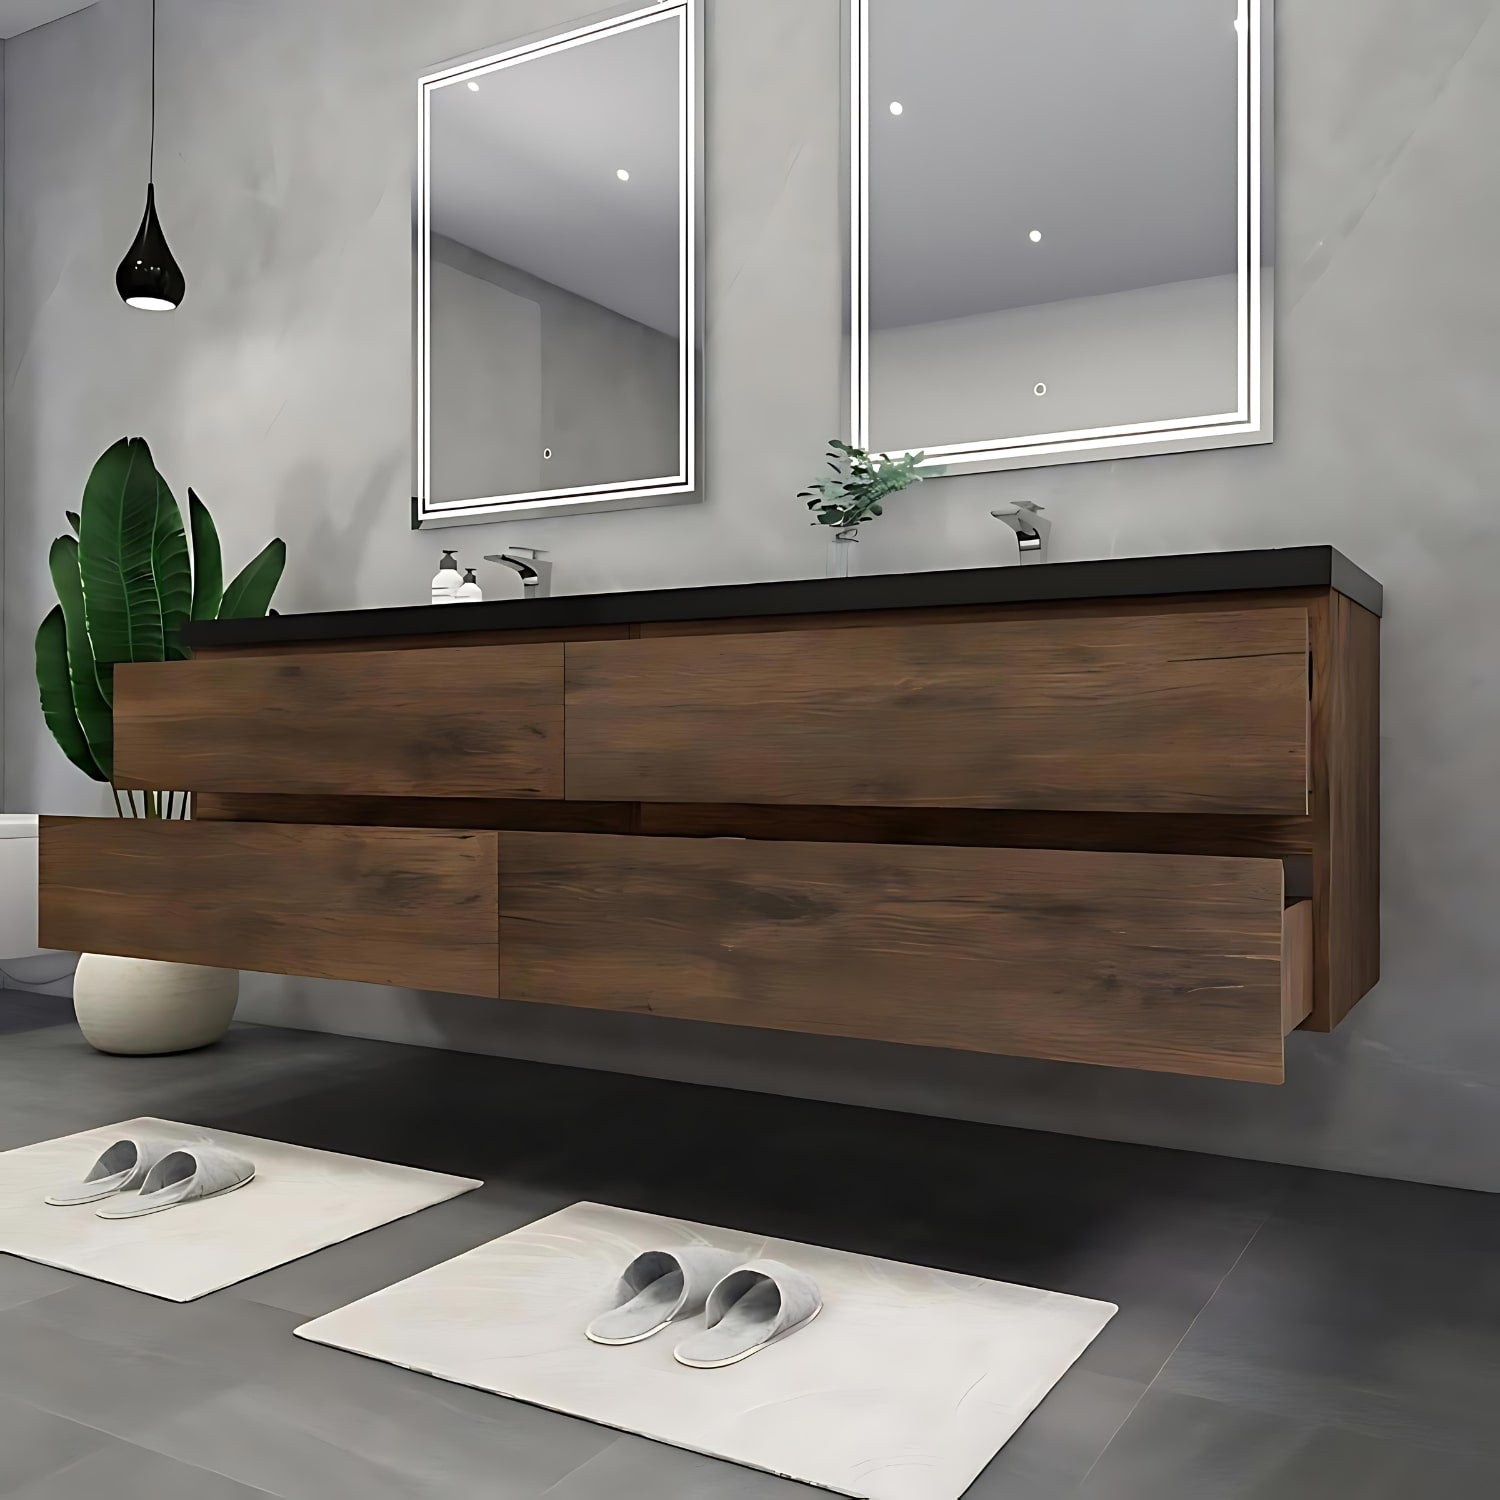 82 inch Floating bathroom vanity perfect for any master bathroom